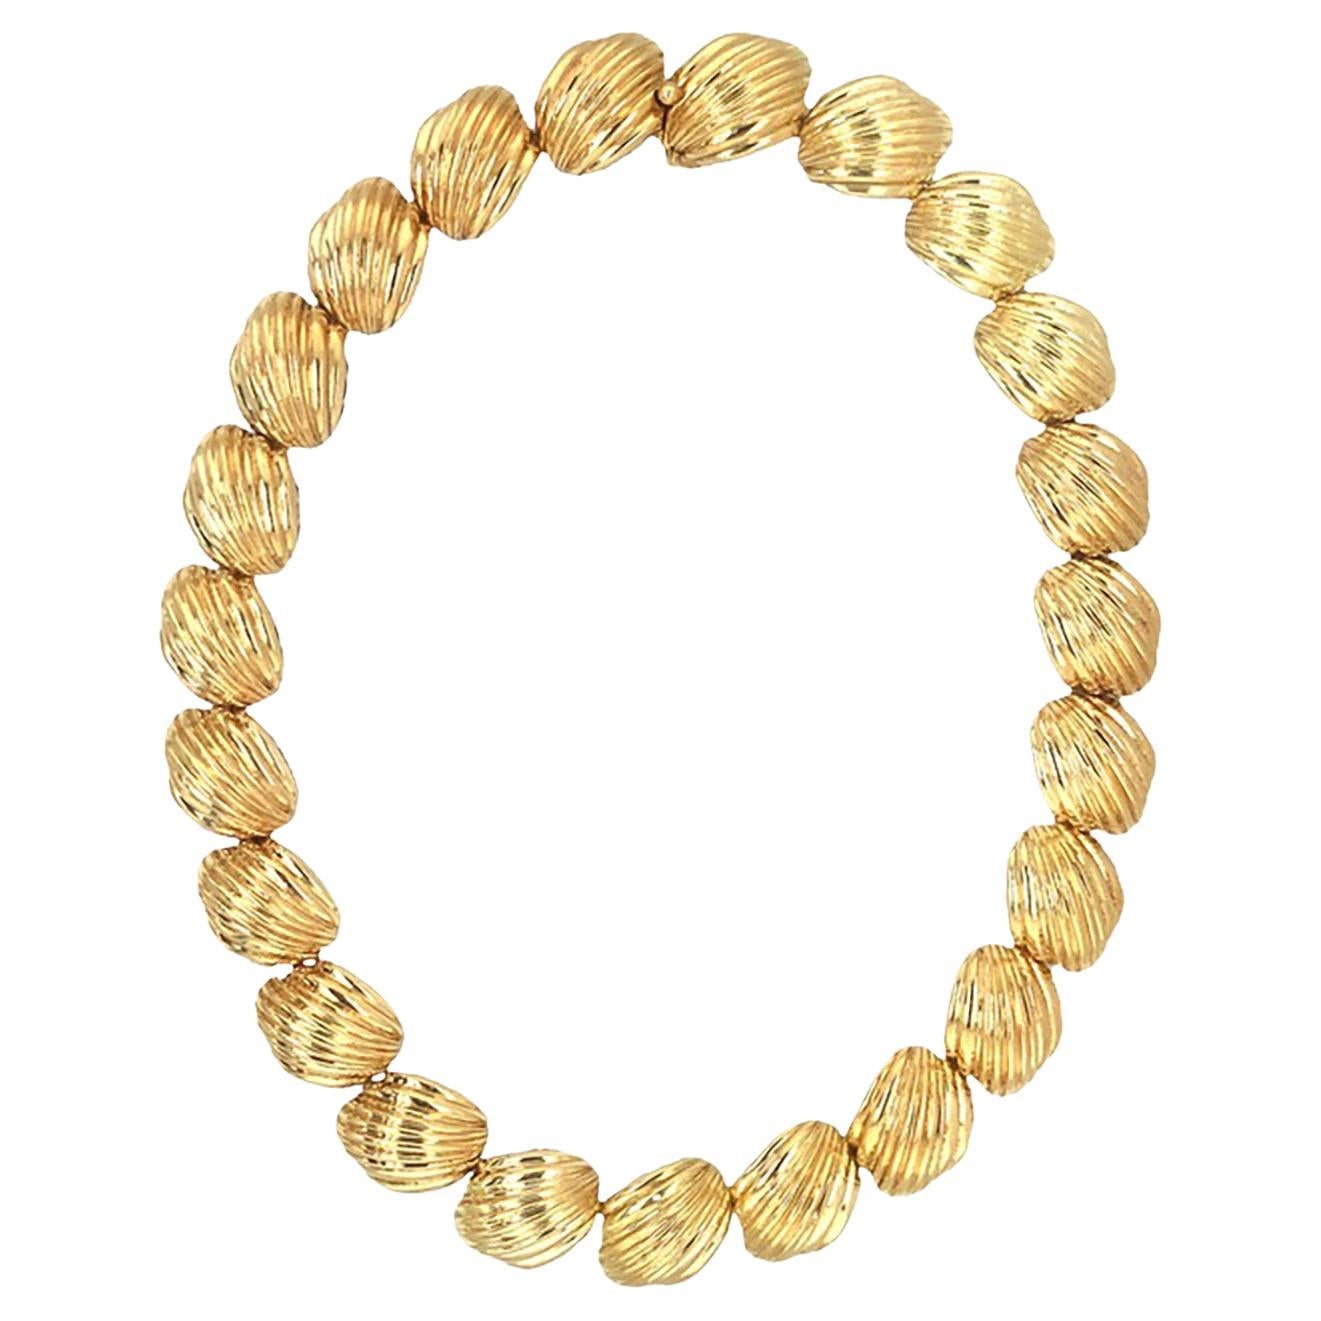 Shell Link 18K Yellow Gold Necklace by Hammerman Brothers